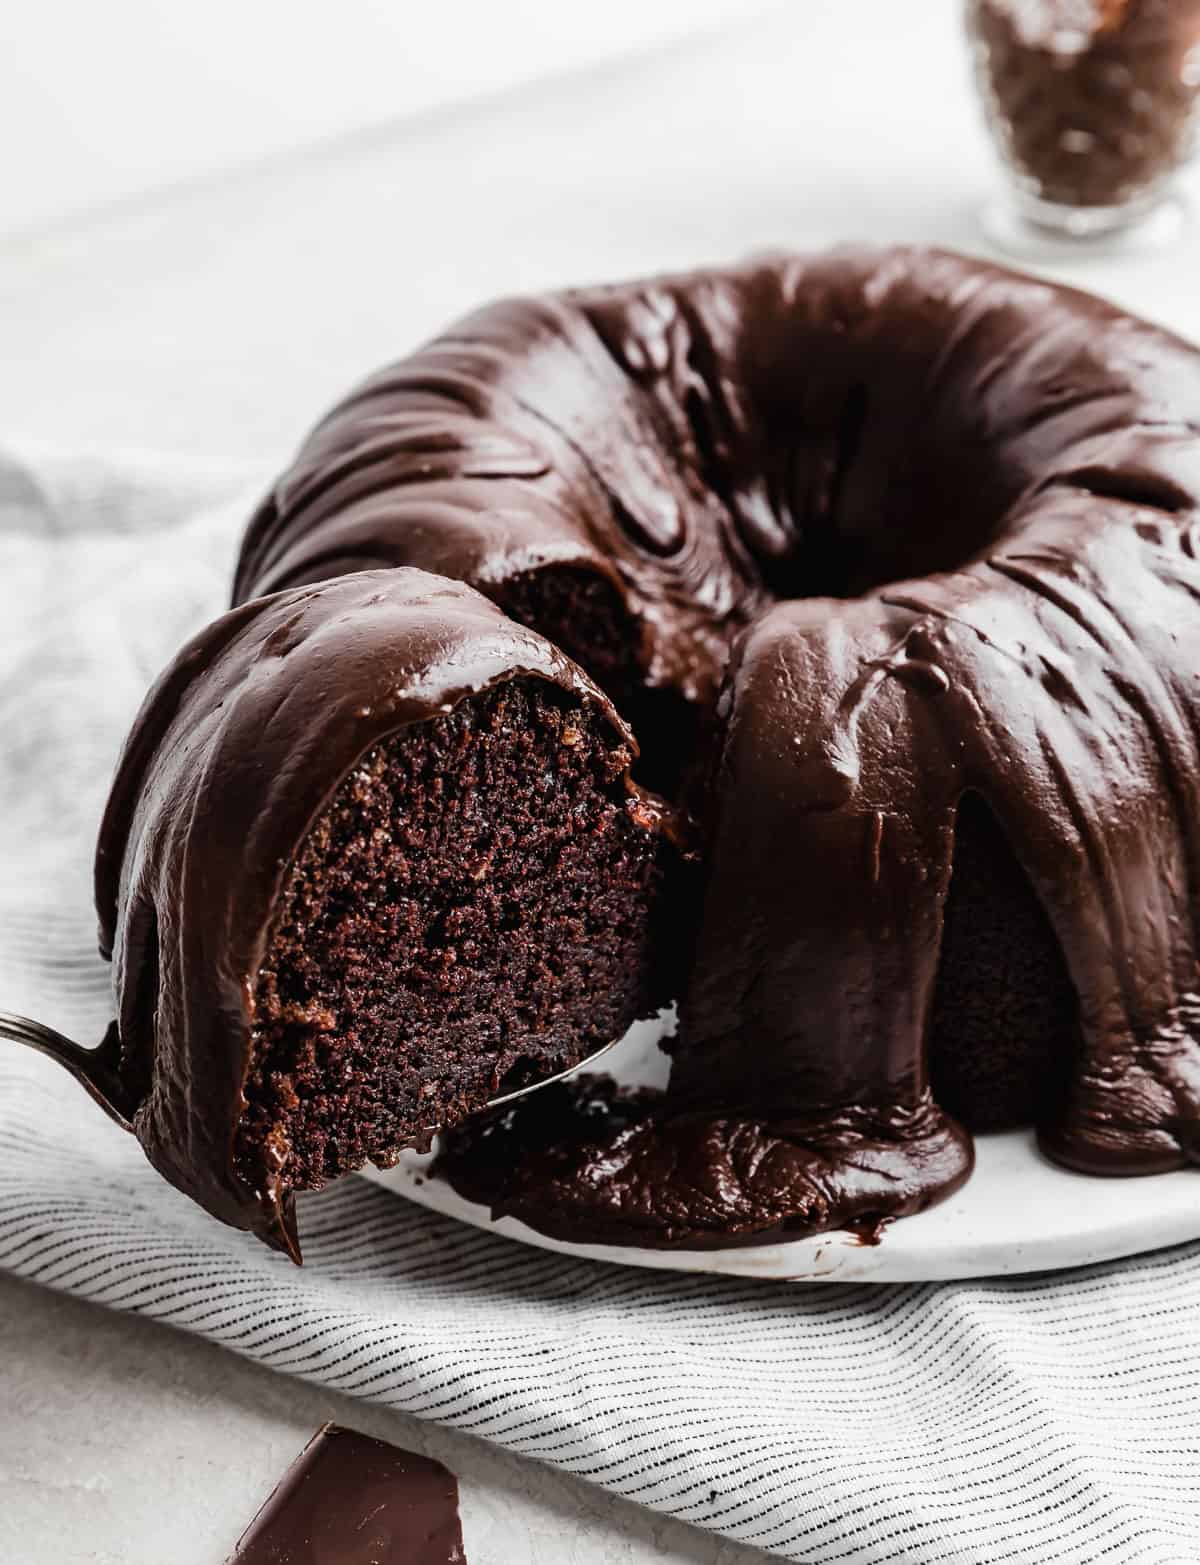 A chocolate glazed Chocolate Buttermilk Bundt Cake with a slice being removed from the cake.